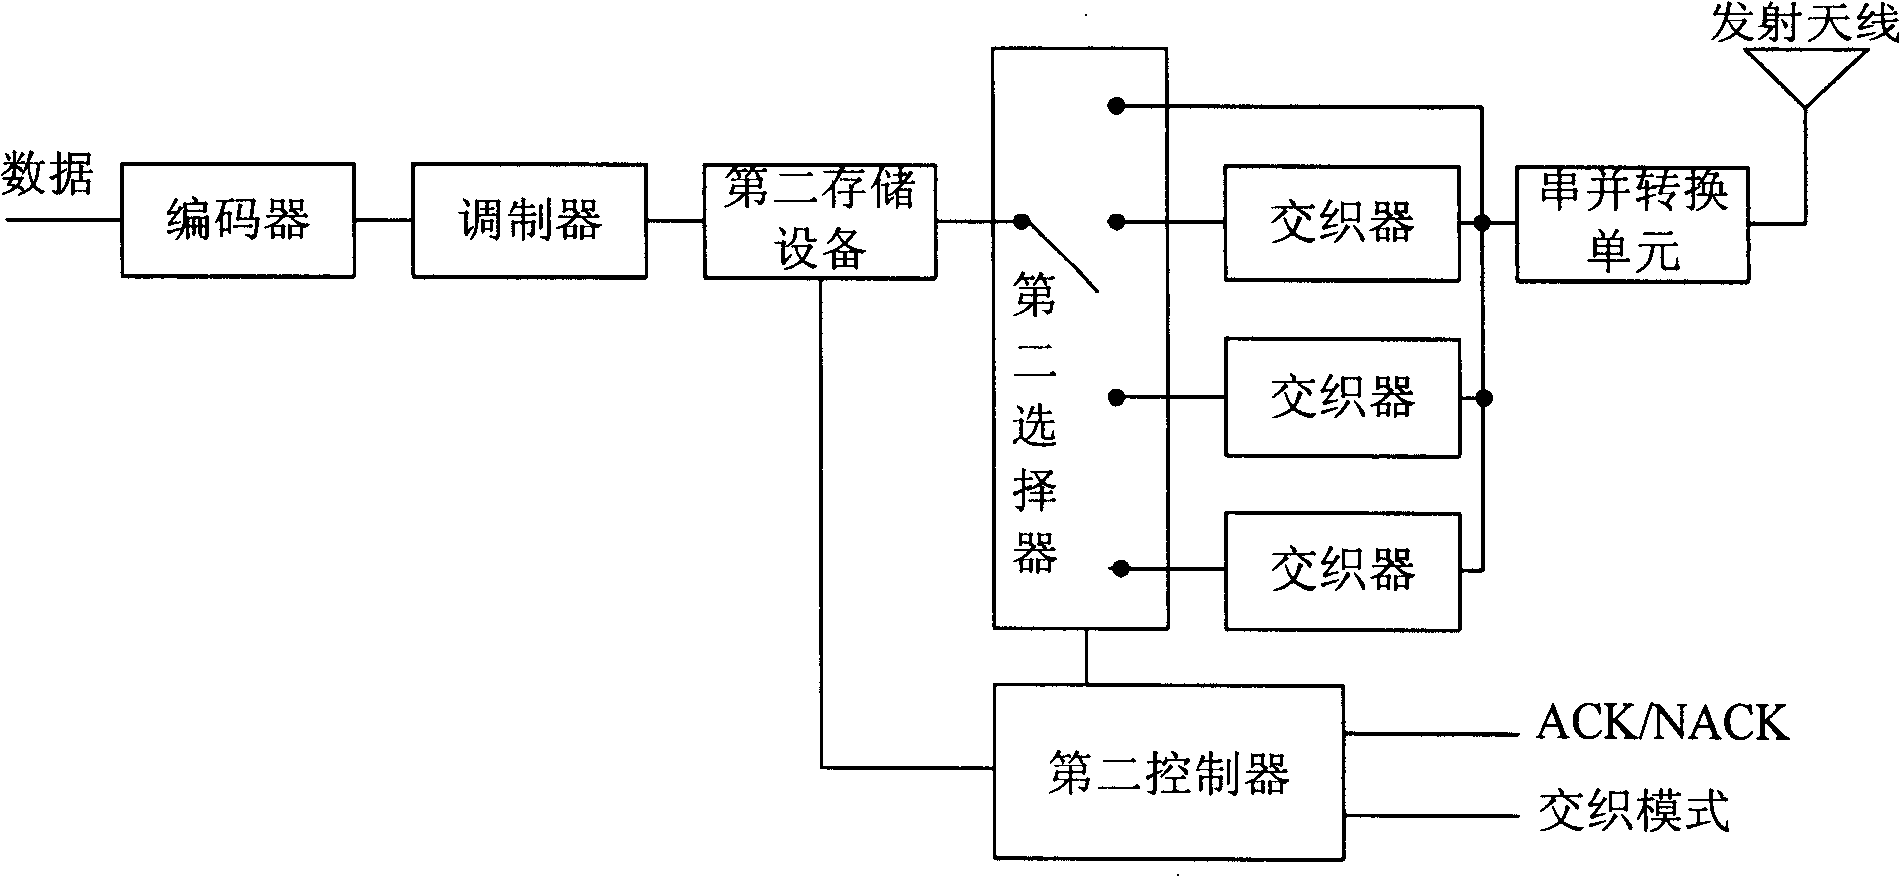 Method for improving transport efficiency of multi-carrier communication system and multi-carrier communication system